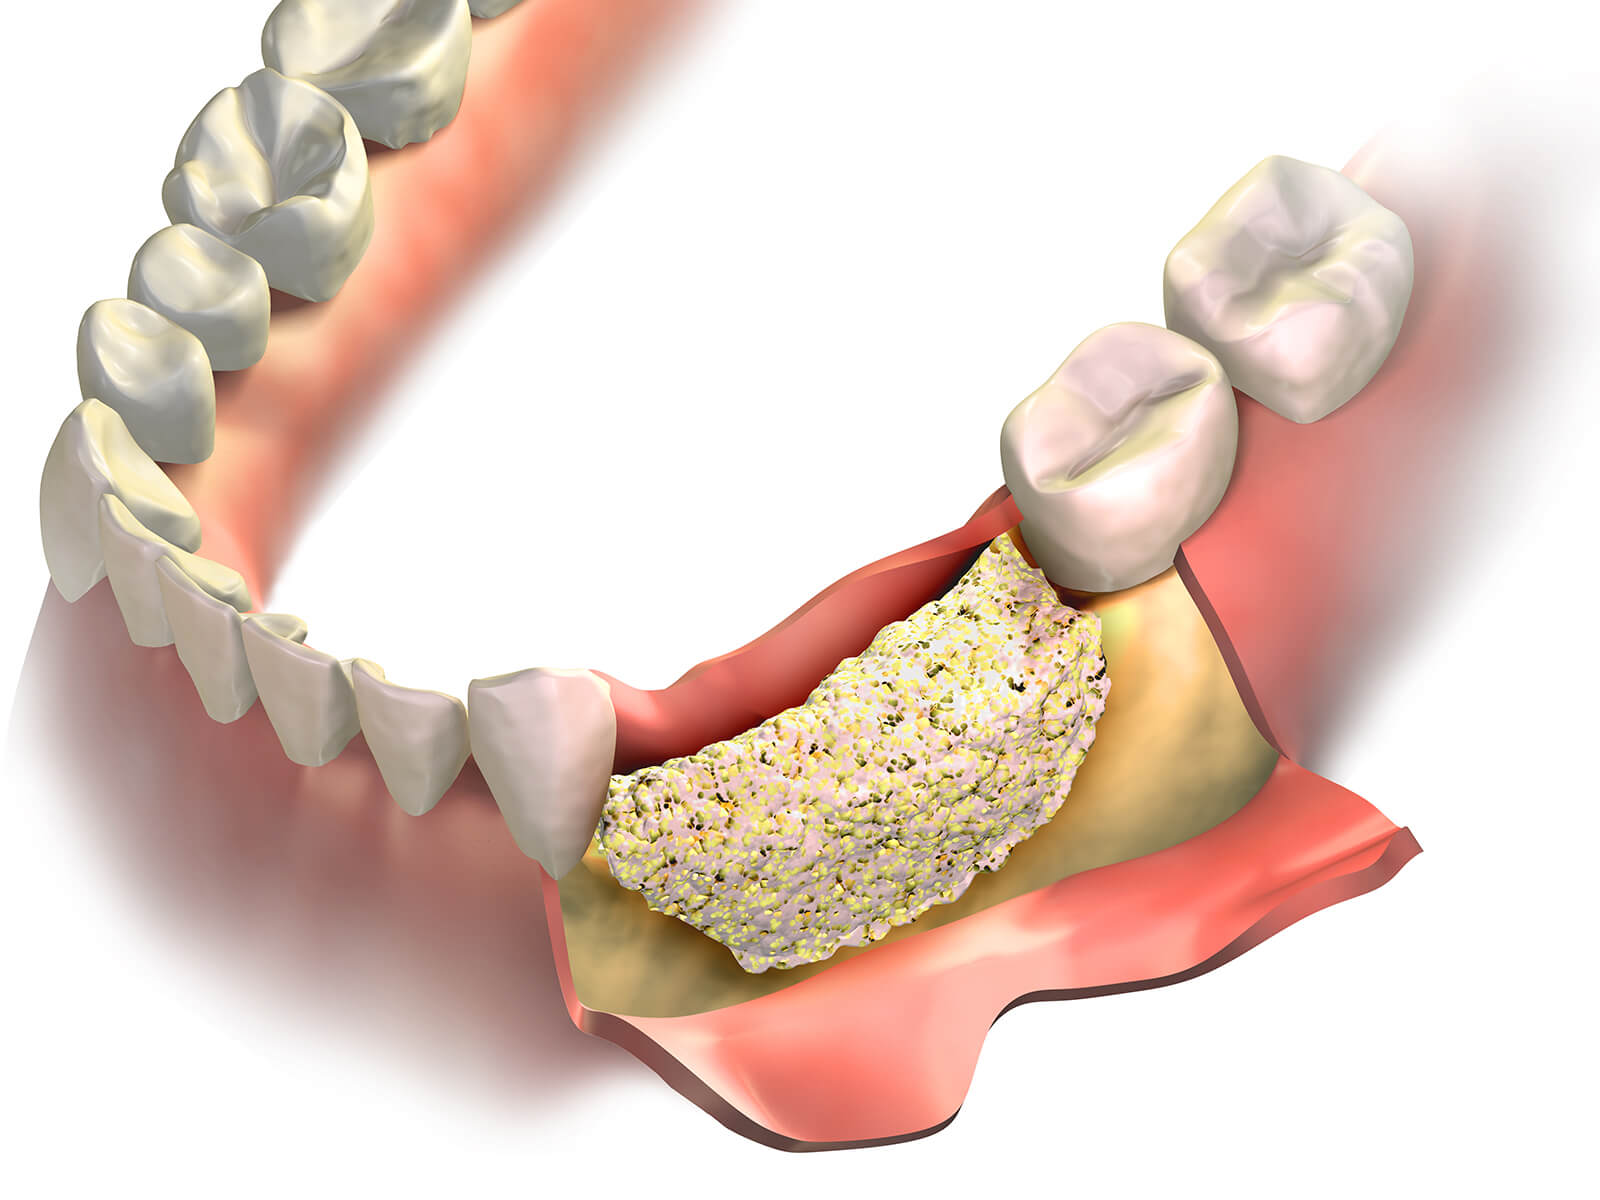 Dental Bone Graft Recovery & Aftercare: What To Expect